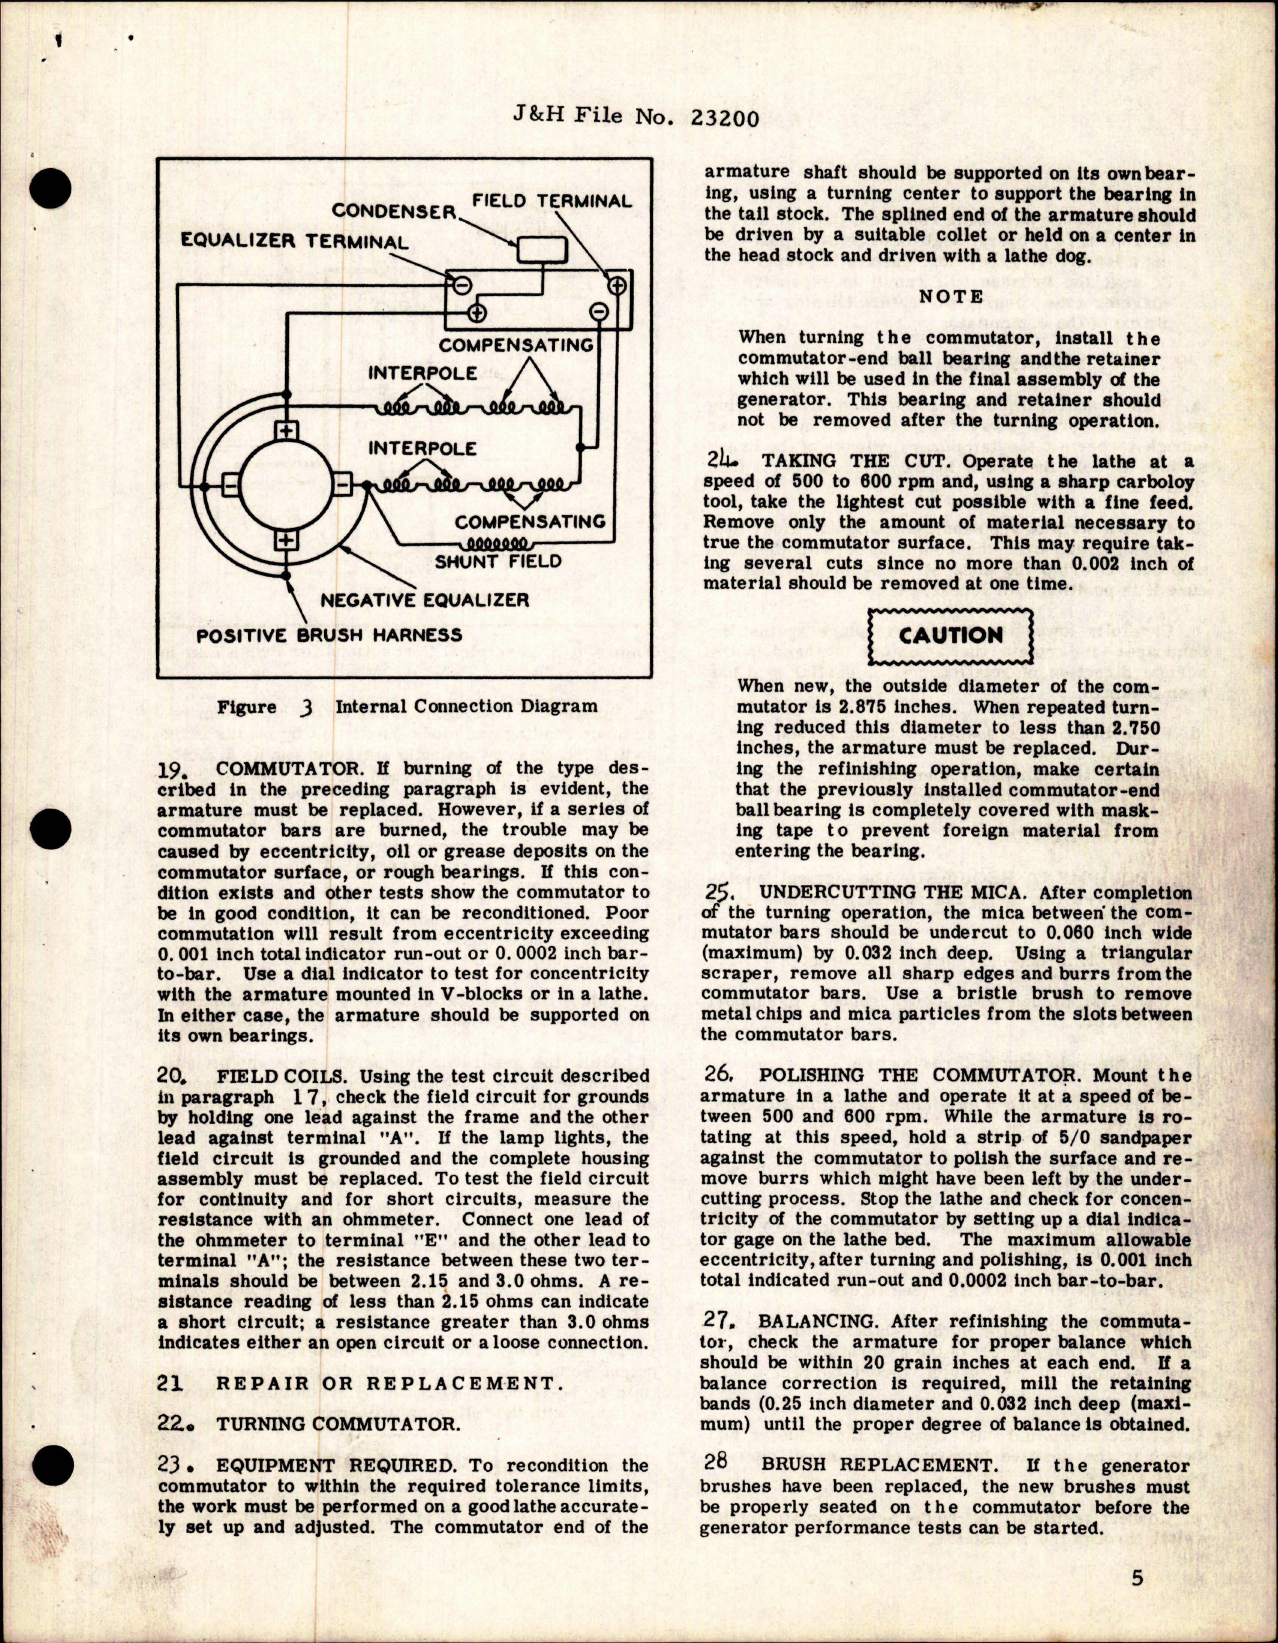 Sample page 7 from AirCorps Library document: Overhaul Instructions with Parts Breakdown for Starter Generators